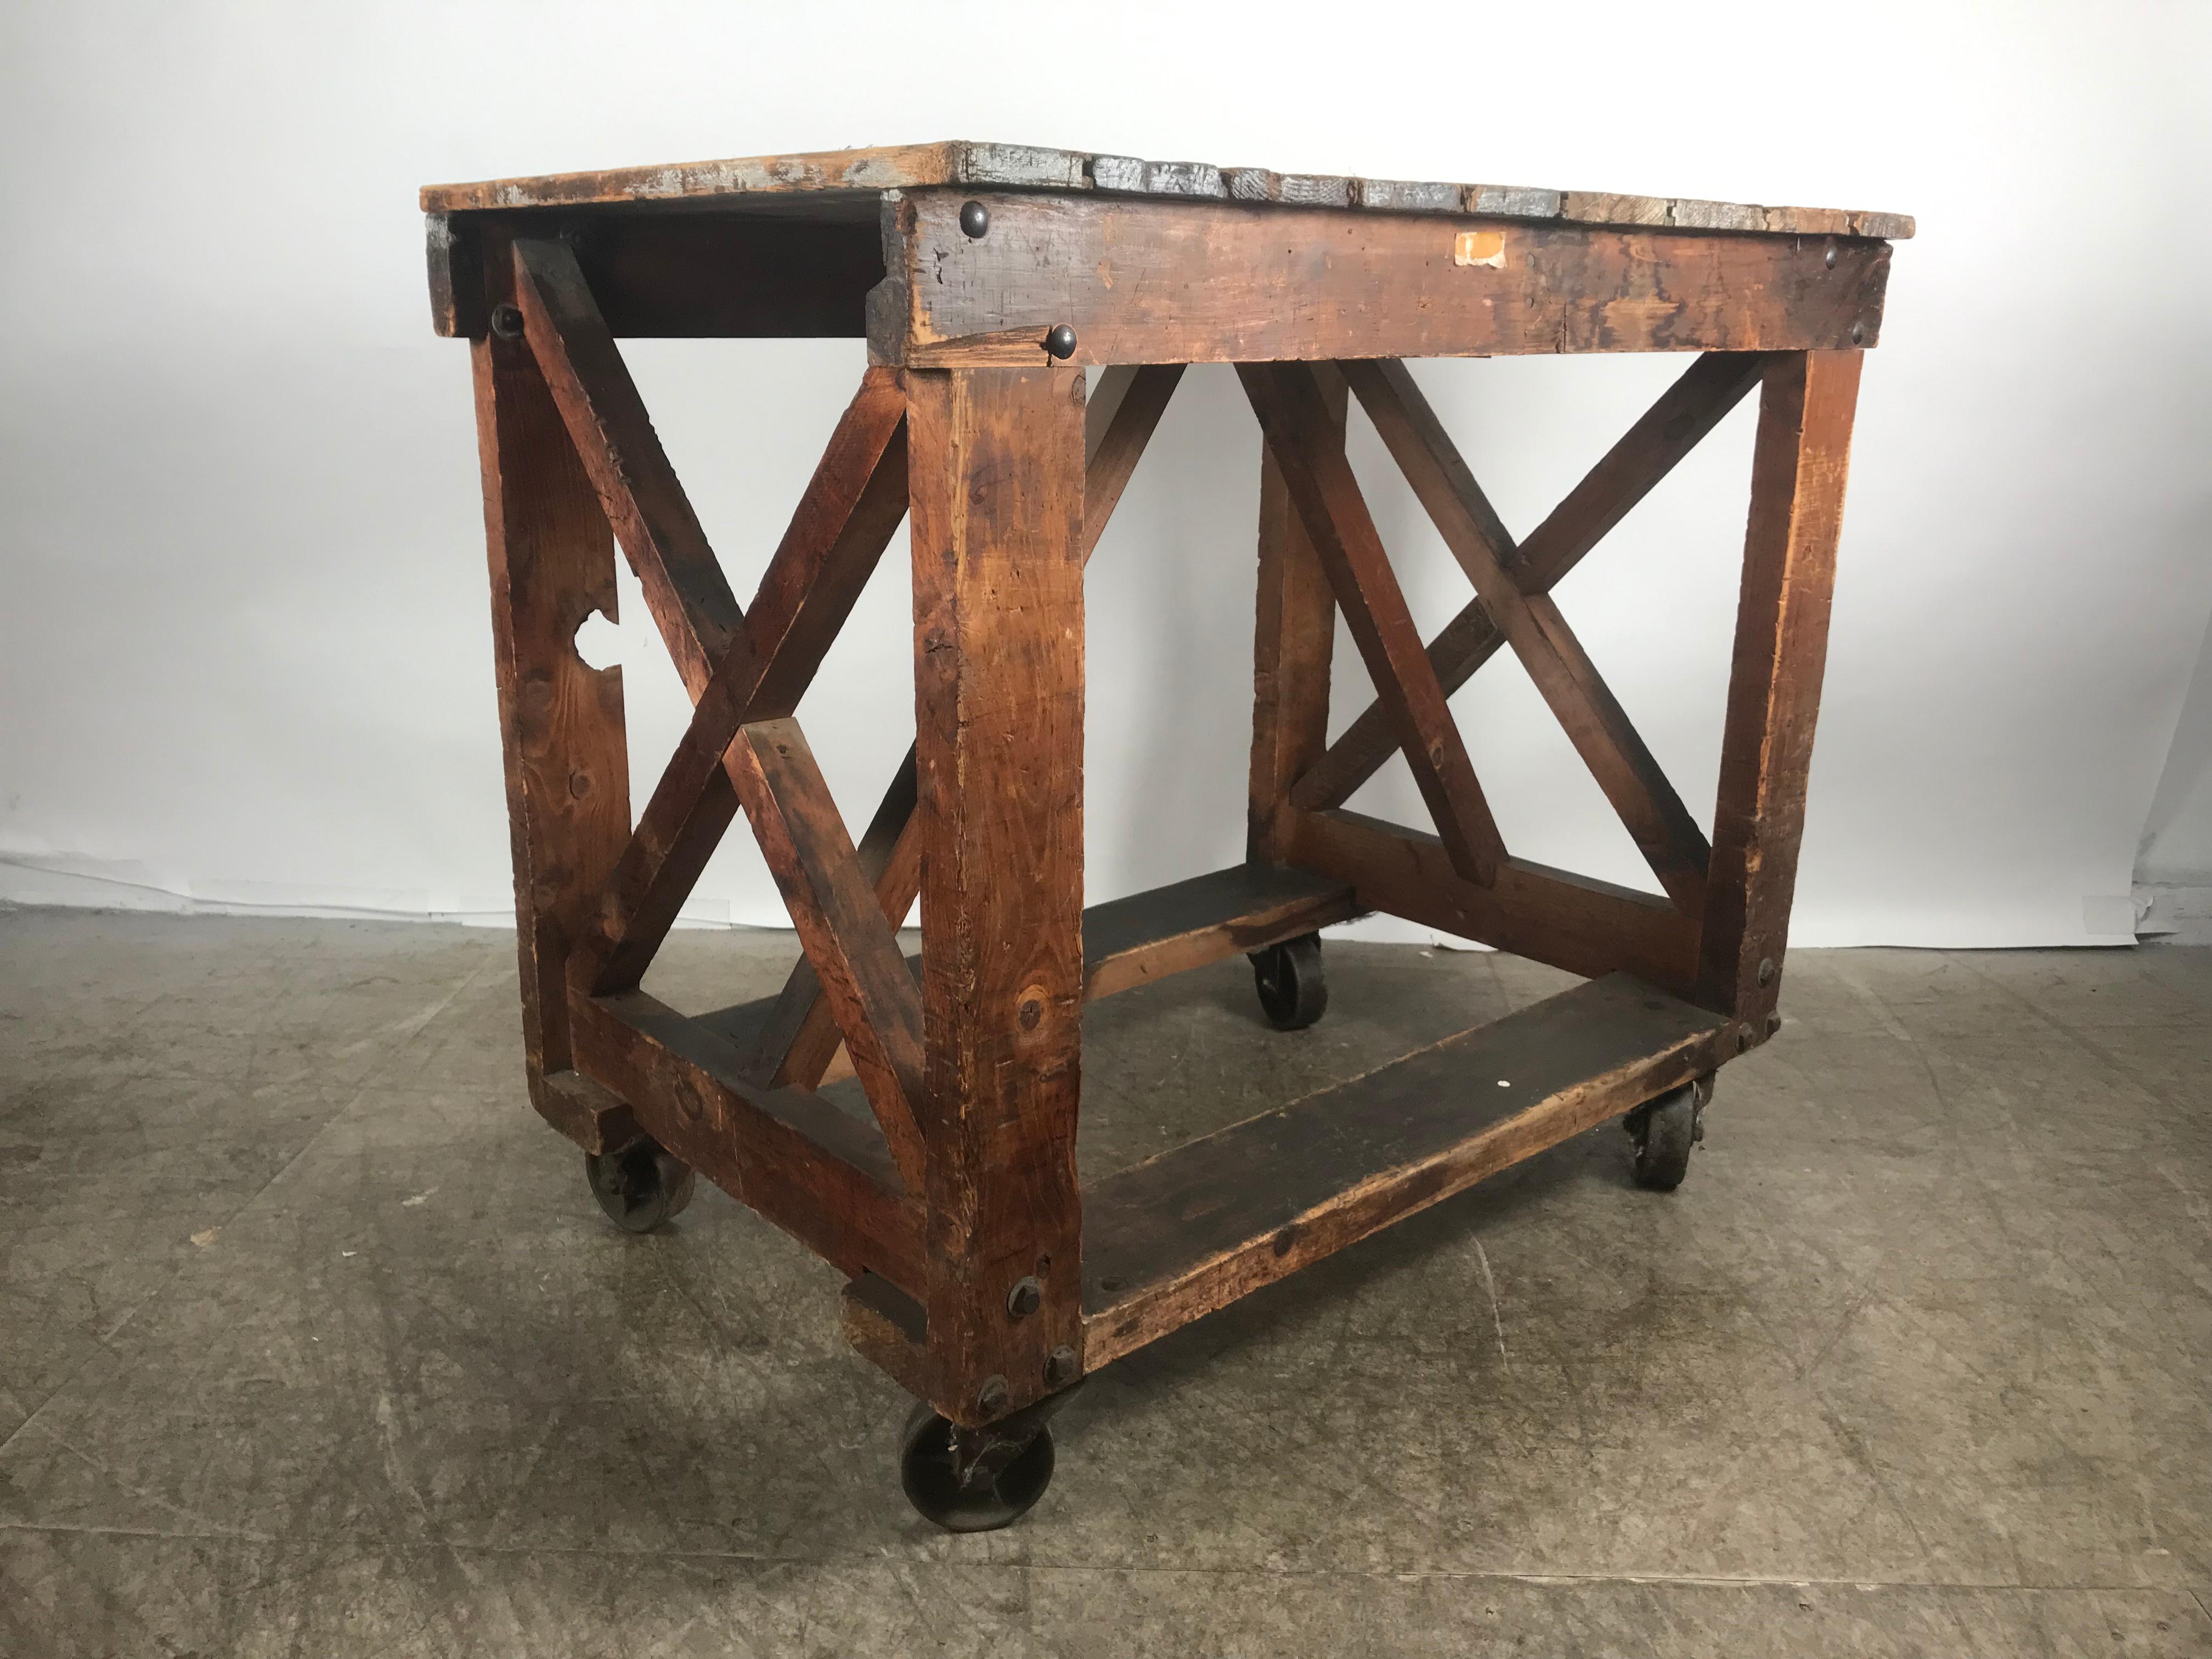 Antique Industrial factory work table on iron castors, simple design, handmade, heavy duty construction, hand delivery avail to New York City or anywhere en route from Buffalo NY.